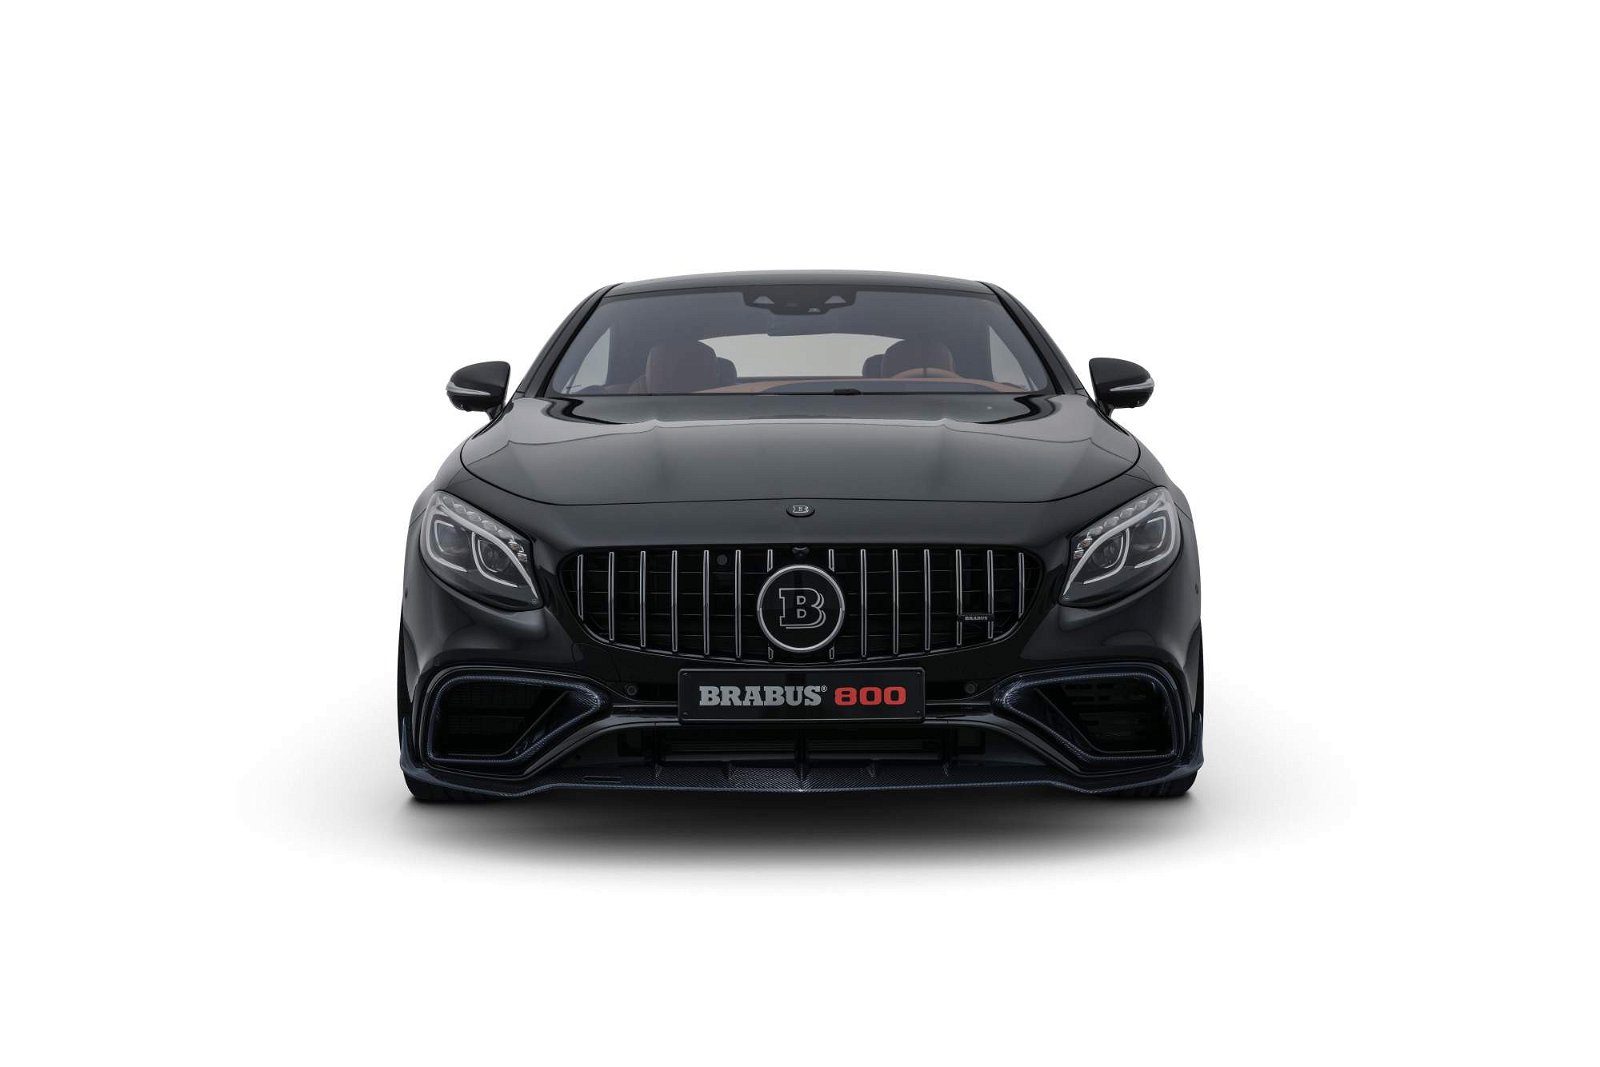 Brabus-800-based-on-Mercedes-AMG-S63-4MATIC+-Coupe-12